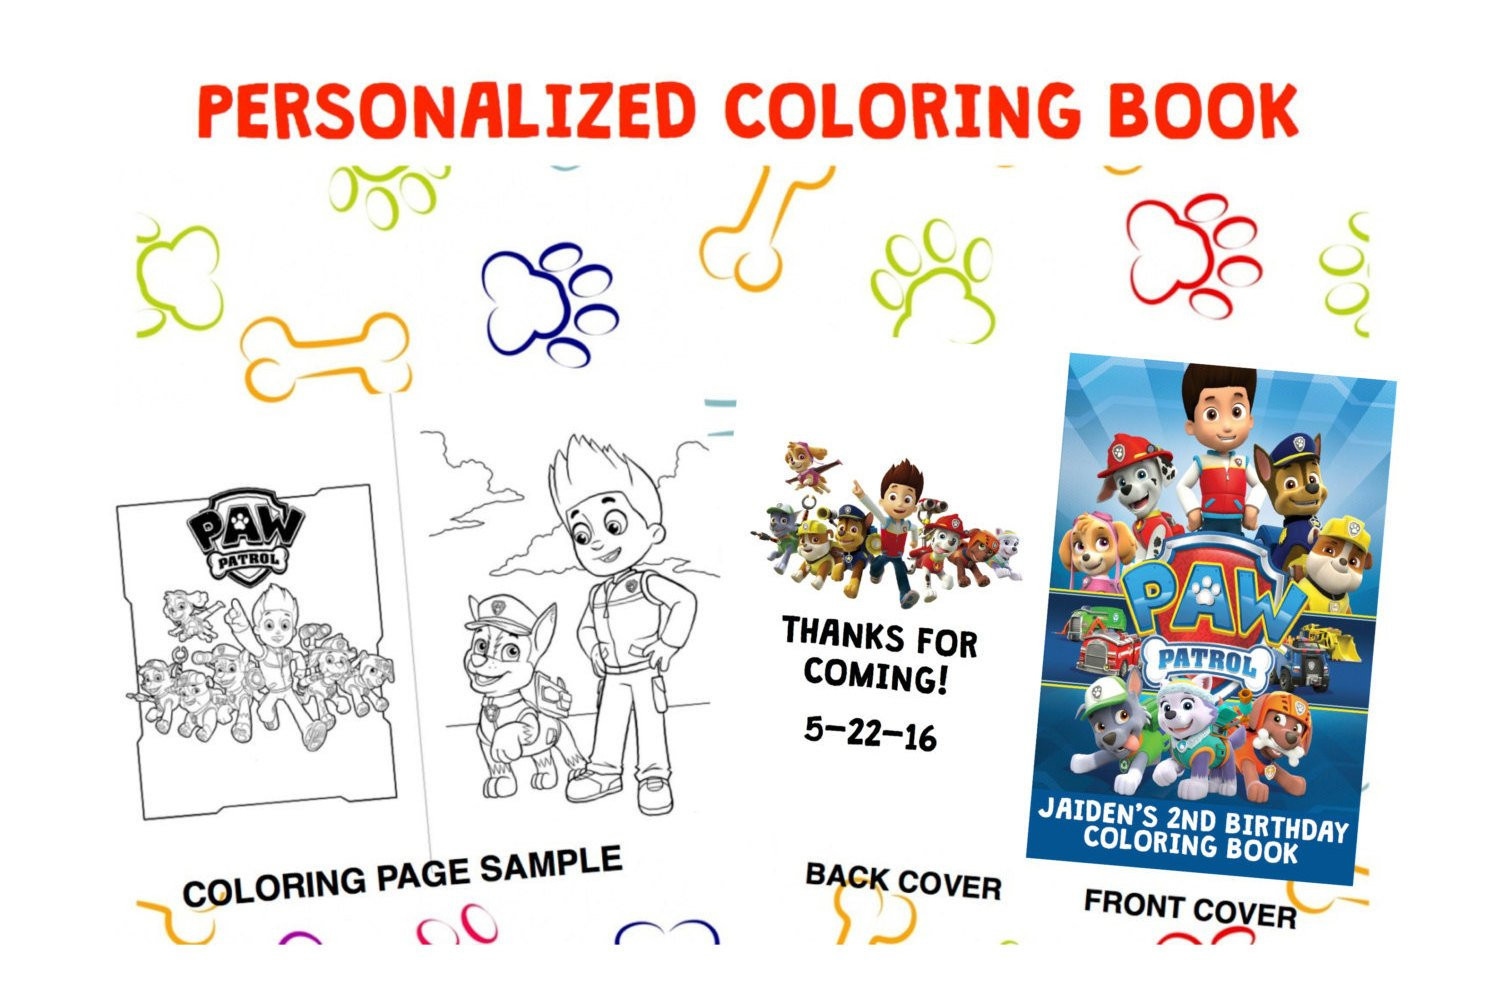 Personalized Coloring Books
 Paw Patrol Personalized Coloring Book Digital by MunchDoodles